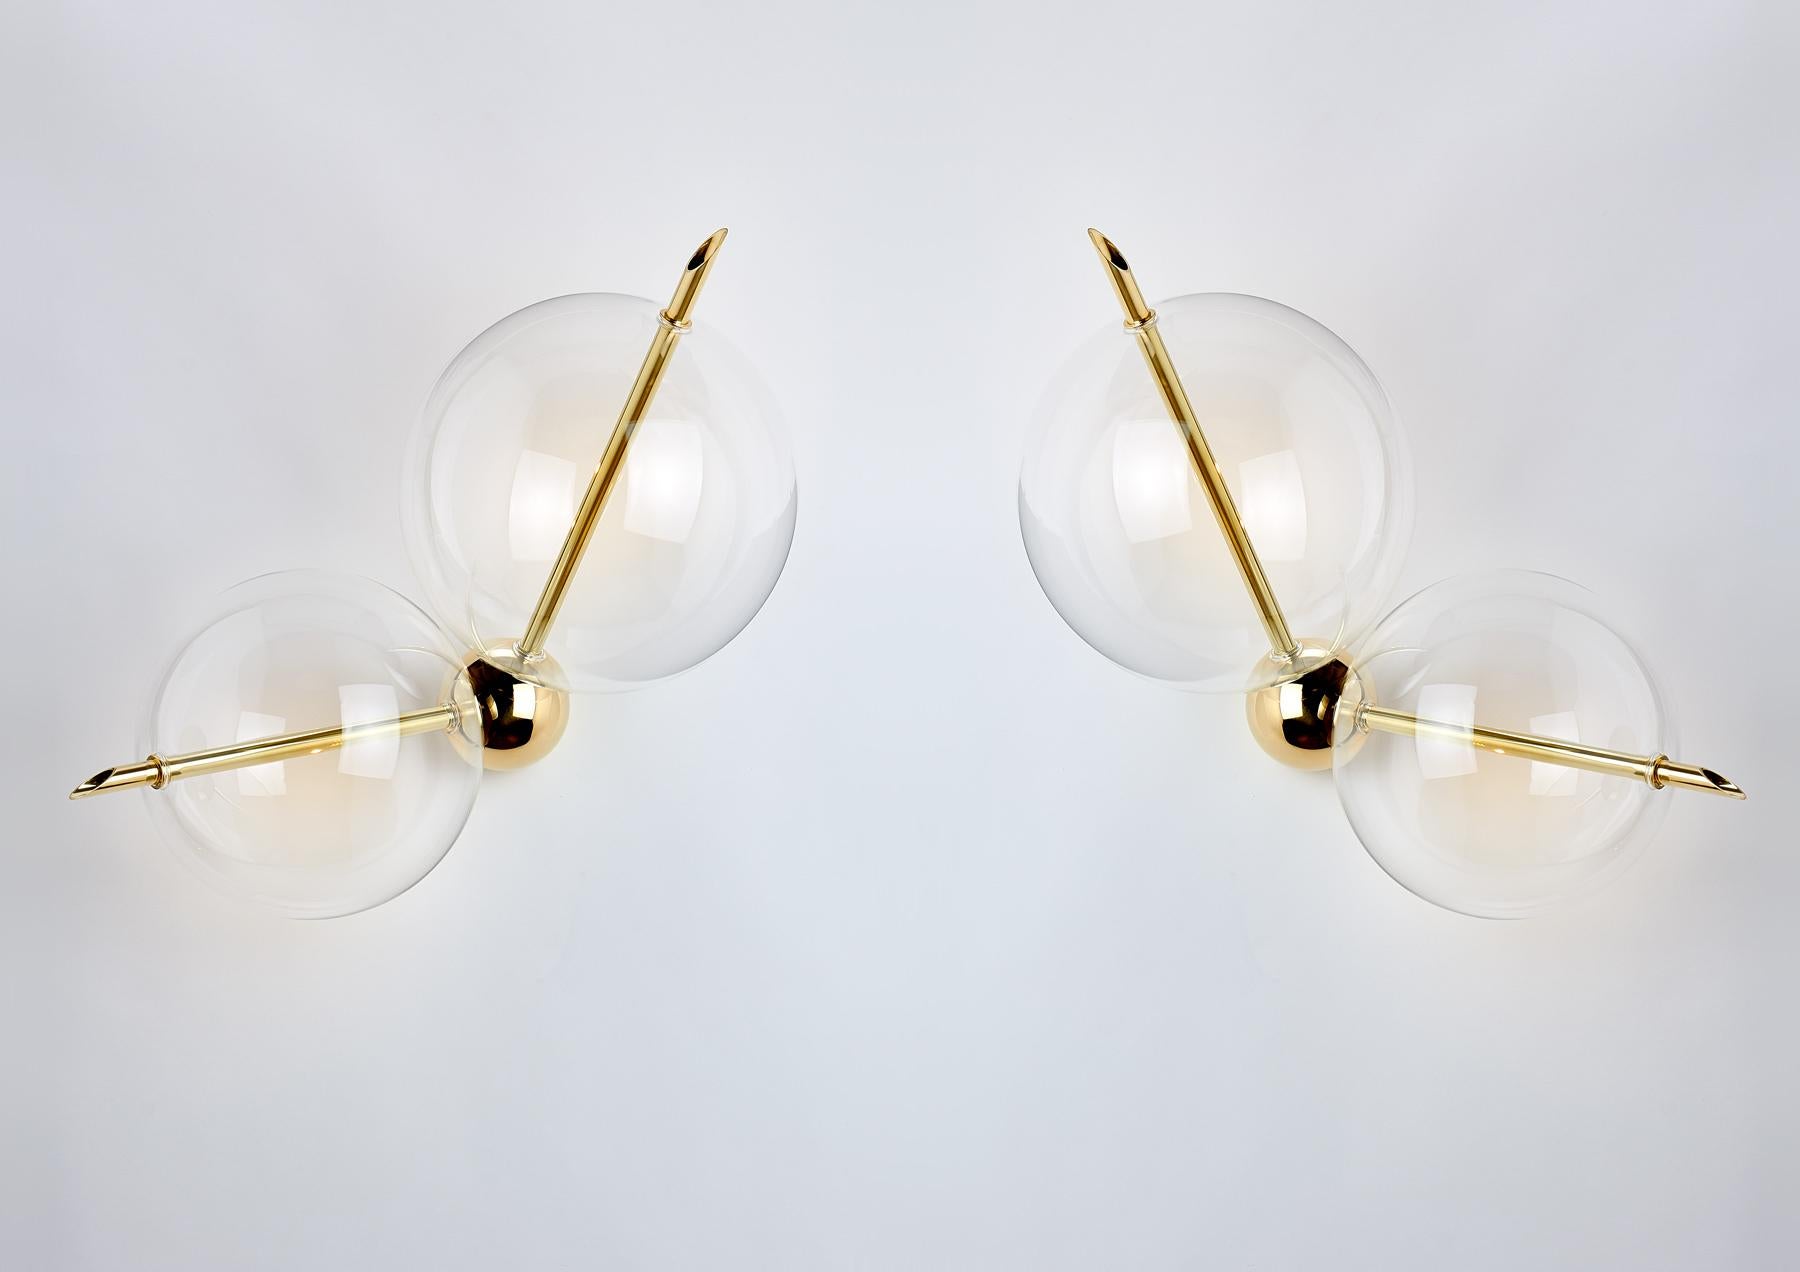 Lune two lights is composed of one solid brass sphere and two handblown glass globes.
The light gets out from the two brass rod crossing over the spheres, and through them, it is diffused softly creating a pleasantly reflecting on the side.
Lune